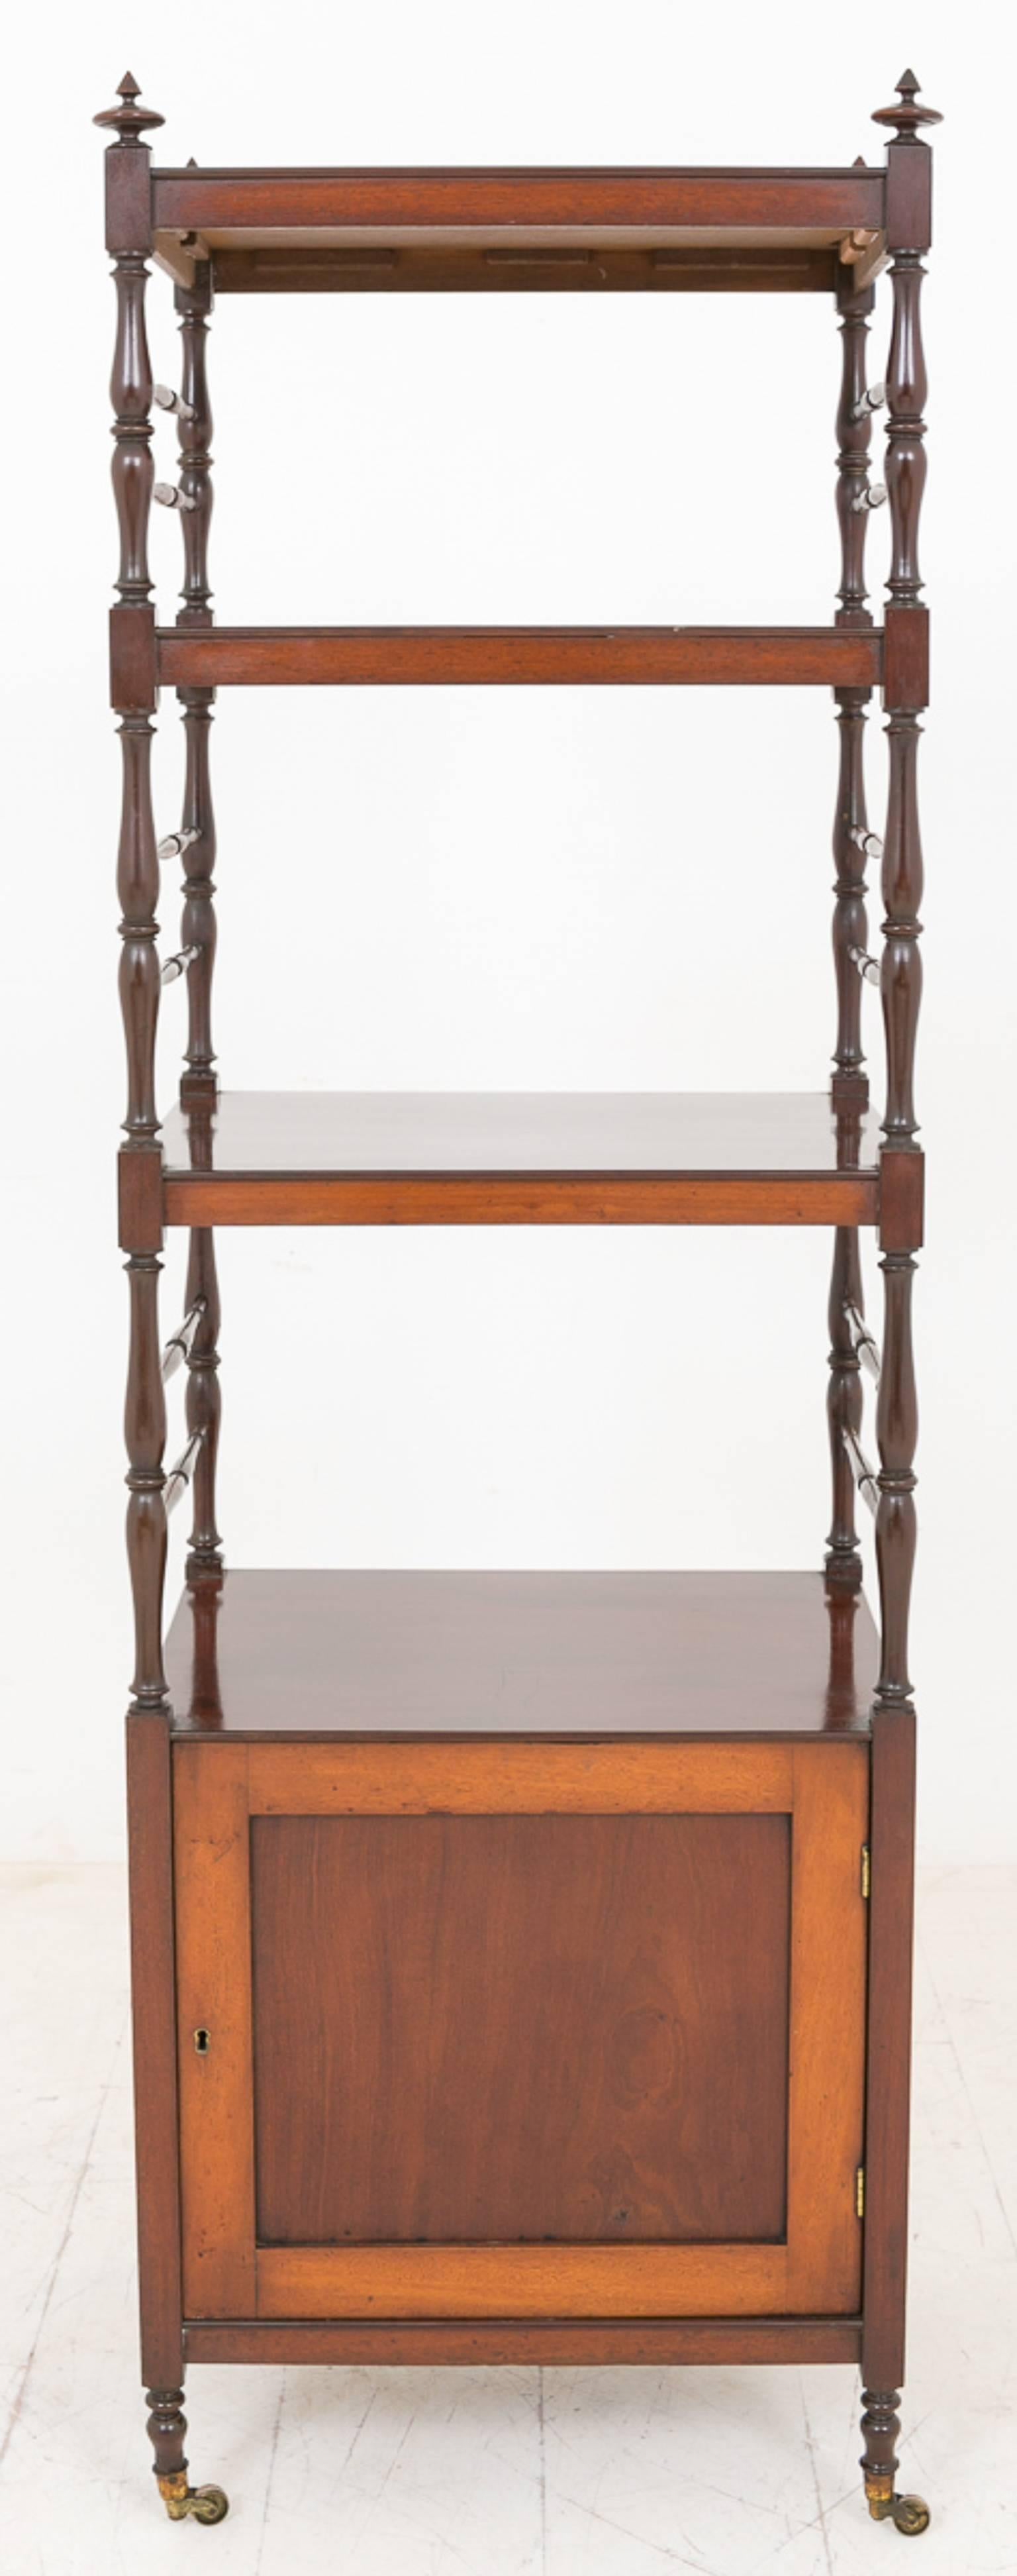 William IV mahogany whatnot.
Standing on brass castors and turned feet.
One cupboard with original brass lock.
The three upper shelves supported by turned columns.

Size:
Height 63